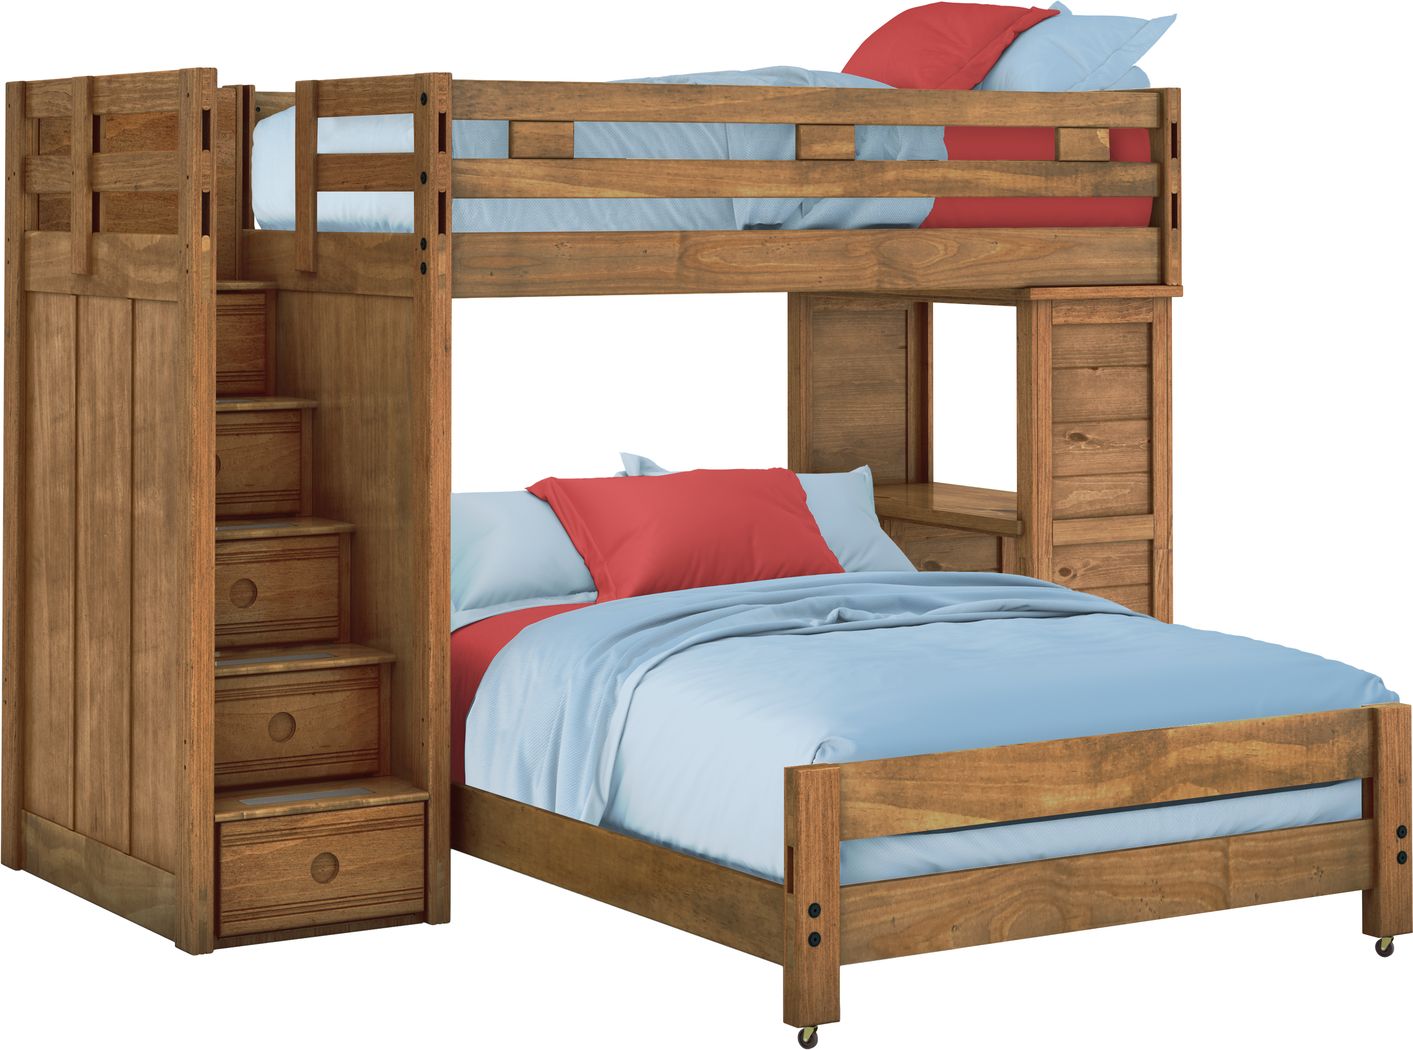 Bunk Beds With Steps Or Stairs, Wood Bunk Bed With Stairs And Desk